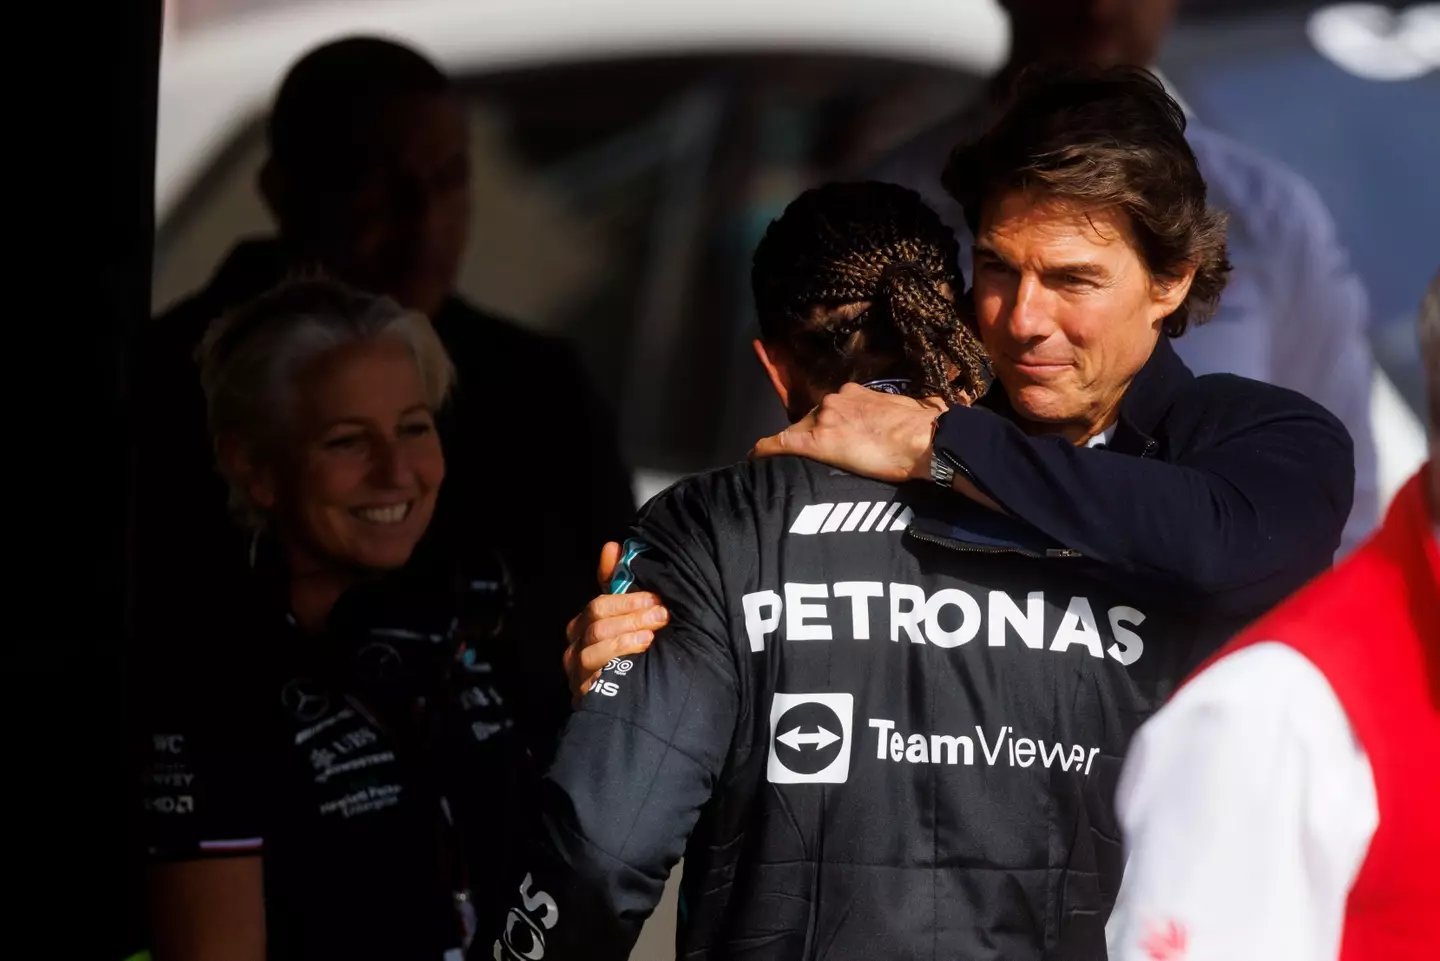 Hamilton and Cruise embrace at the British Grand Prix earlier this year. (Image